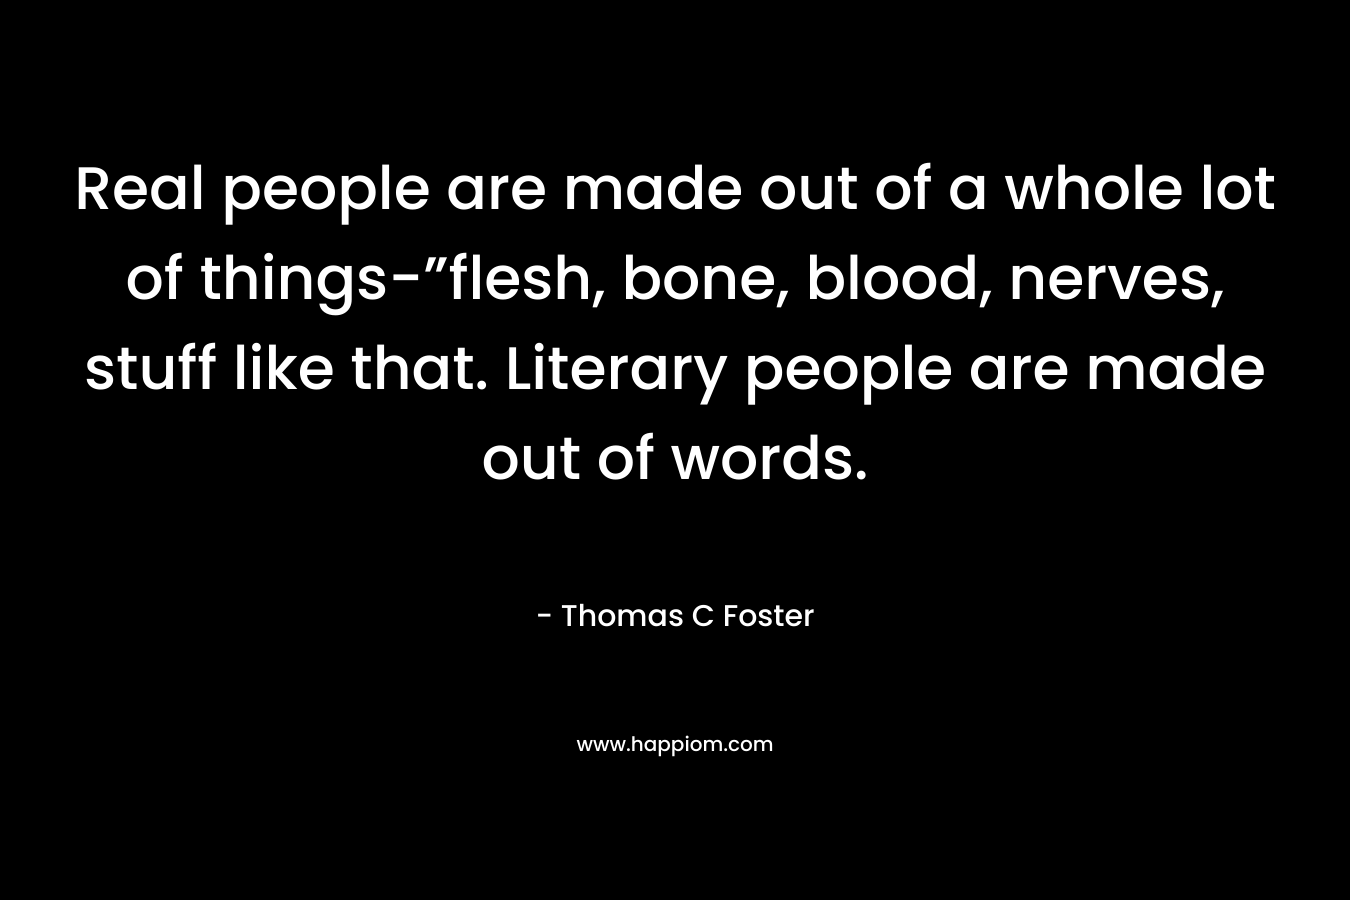 Real people are made out of a whole lot of things-”flesh, bone, blood, nerves, stuff like that. Literary people are made out of words.